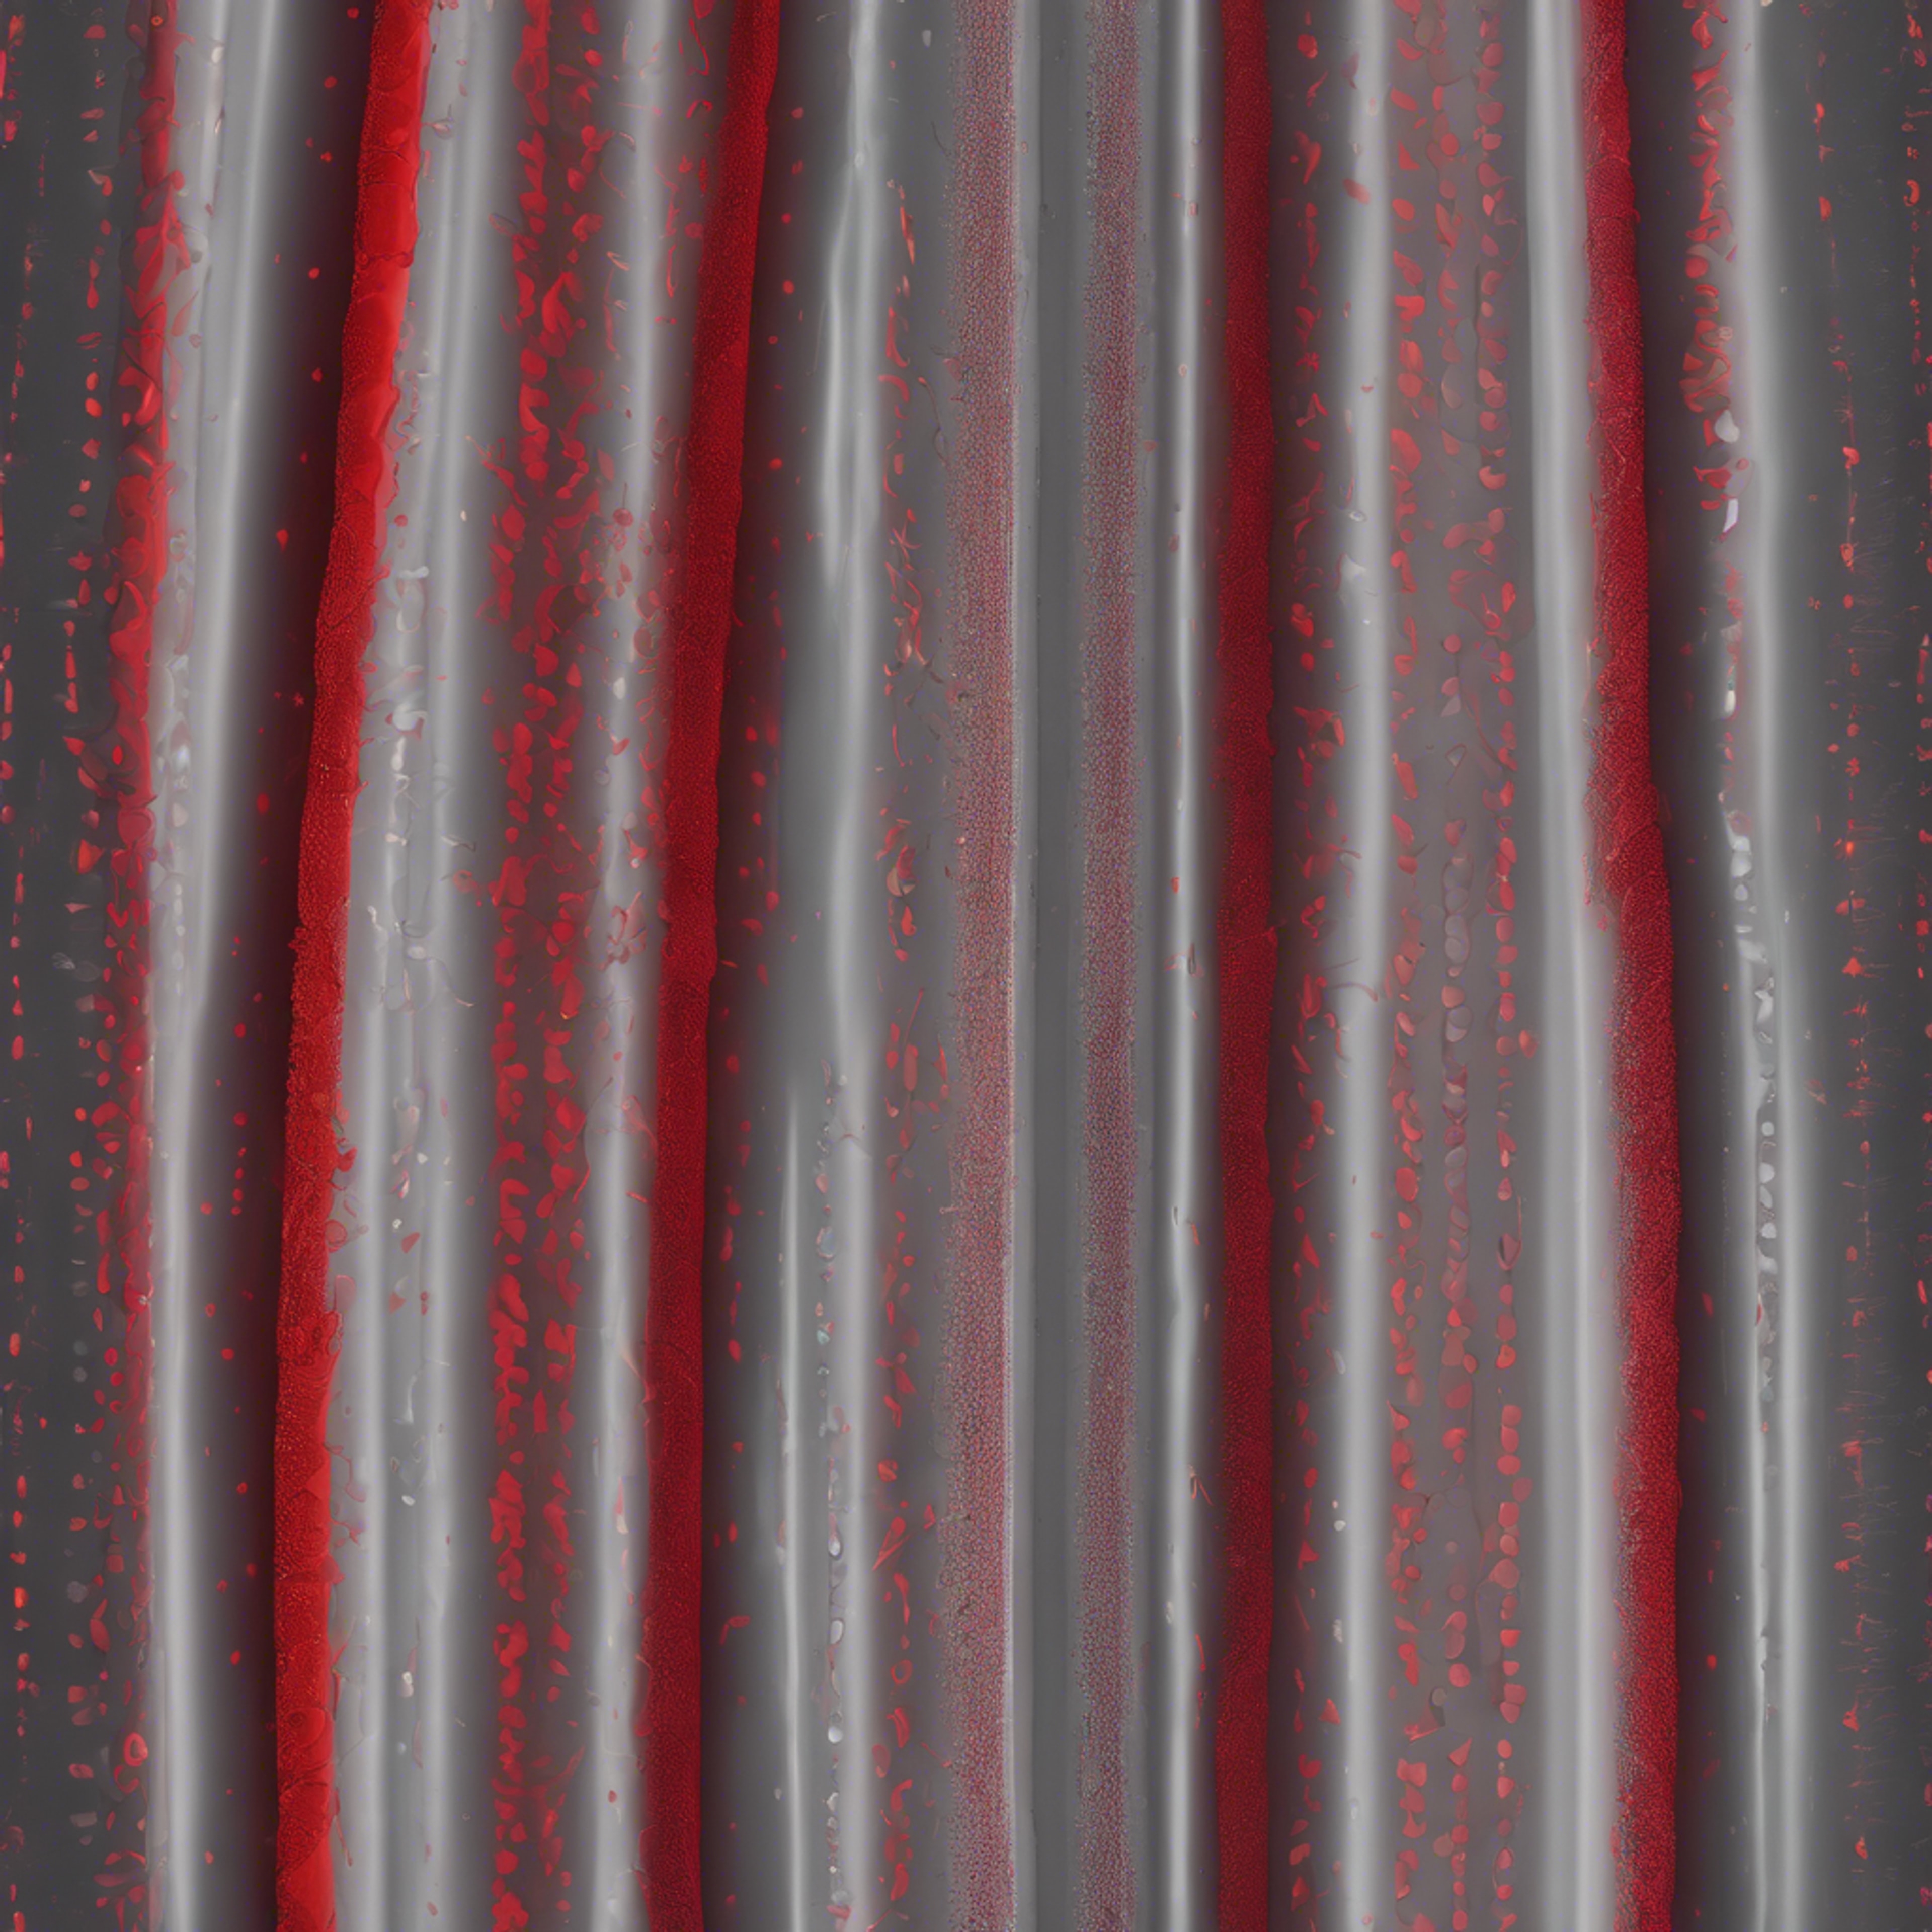 An abstract pattern with hallucinogenic red and grey gradients blending into each other.壁紙[5c97b162f4f748b39a07]